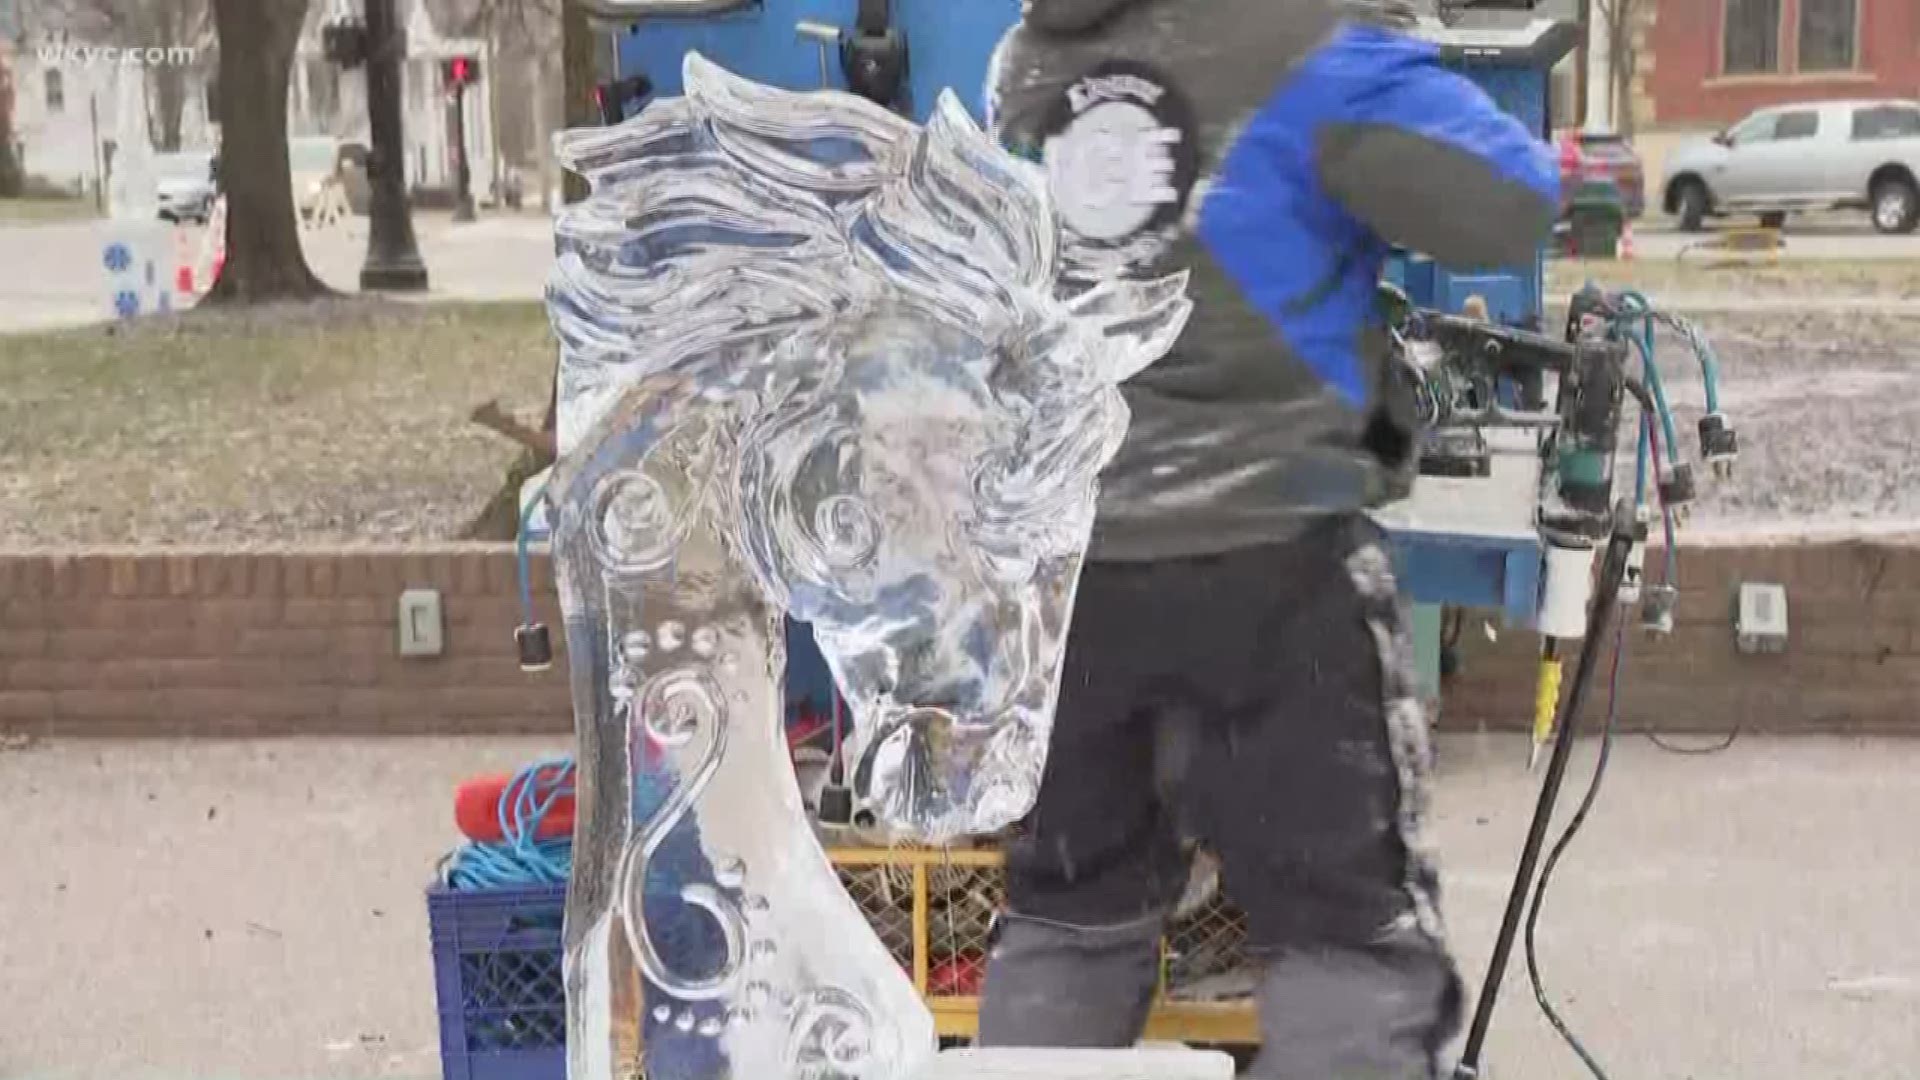 Lindsay helps add finishing touches to an ice sculpture at the Medina Ice Festival